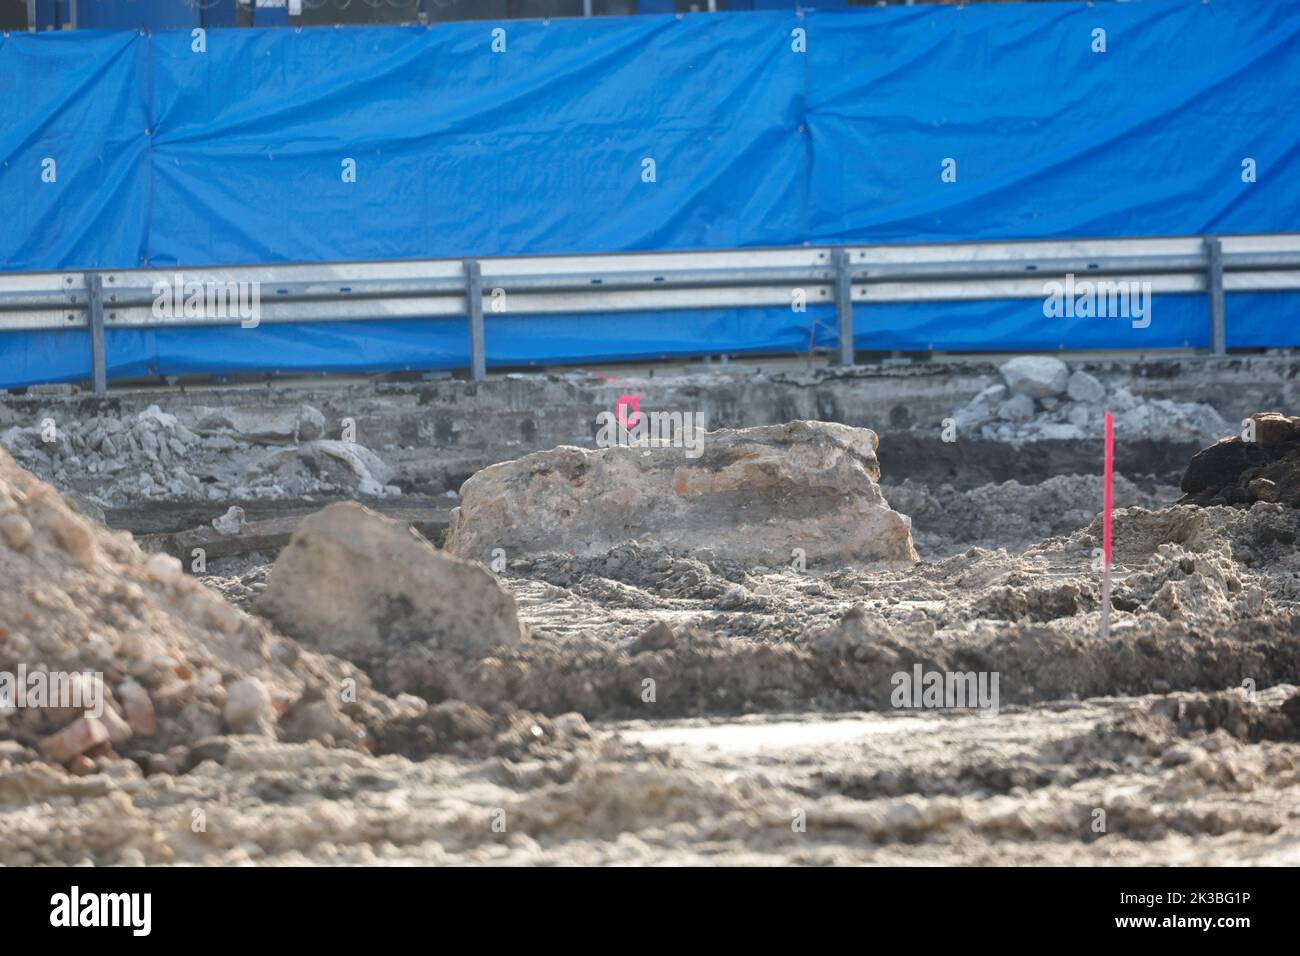 A view of the site of the bomb, during preparations to detonate a 50 kg World War II bomb in Berlin, Germany, September 26, 2022. REUTERS/Michele Tantussi Stock Photo